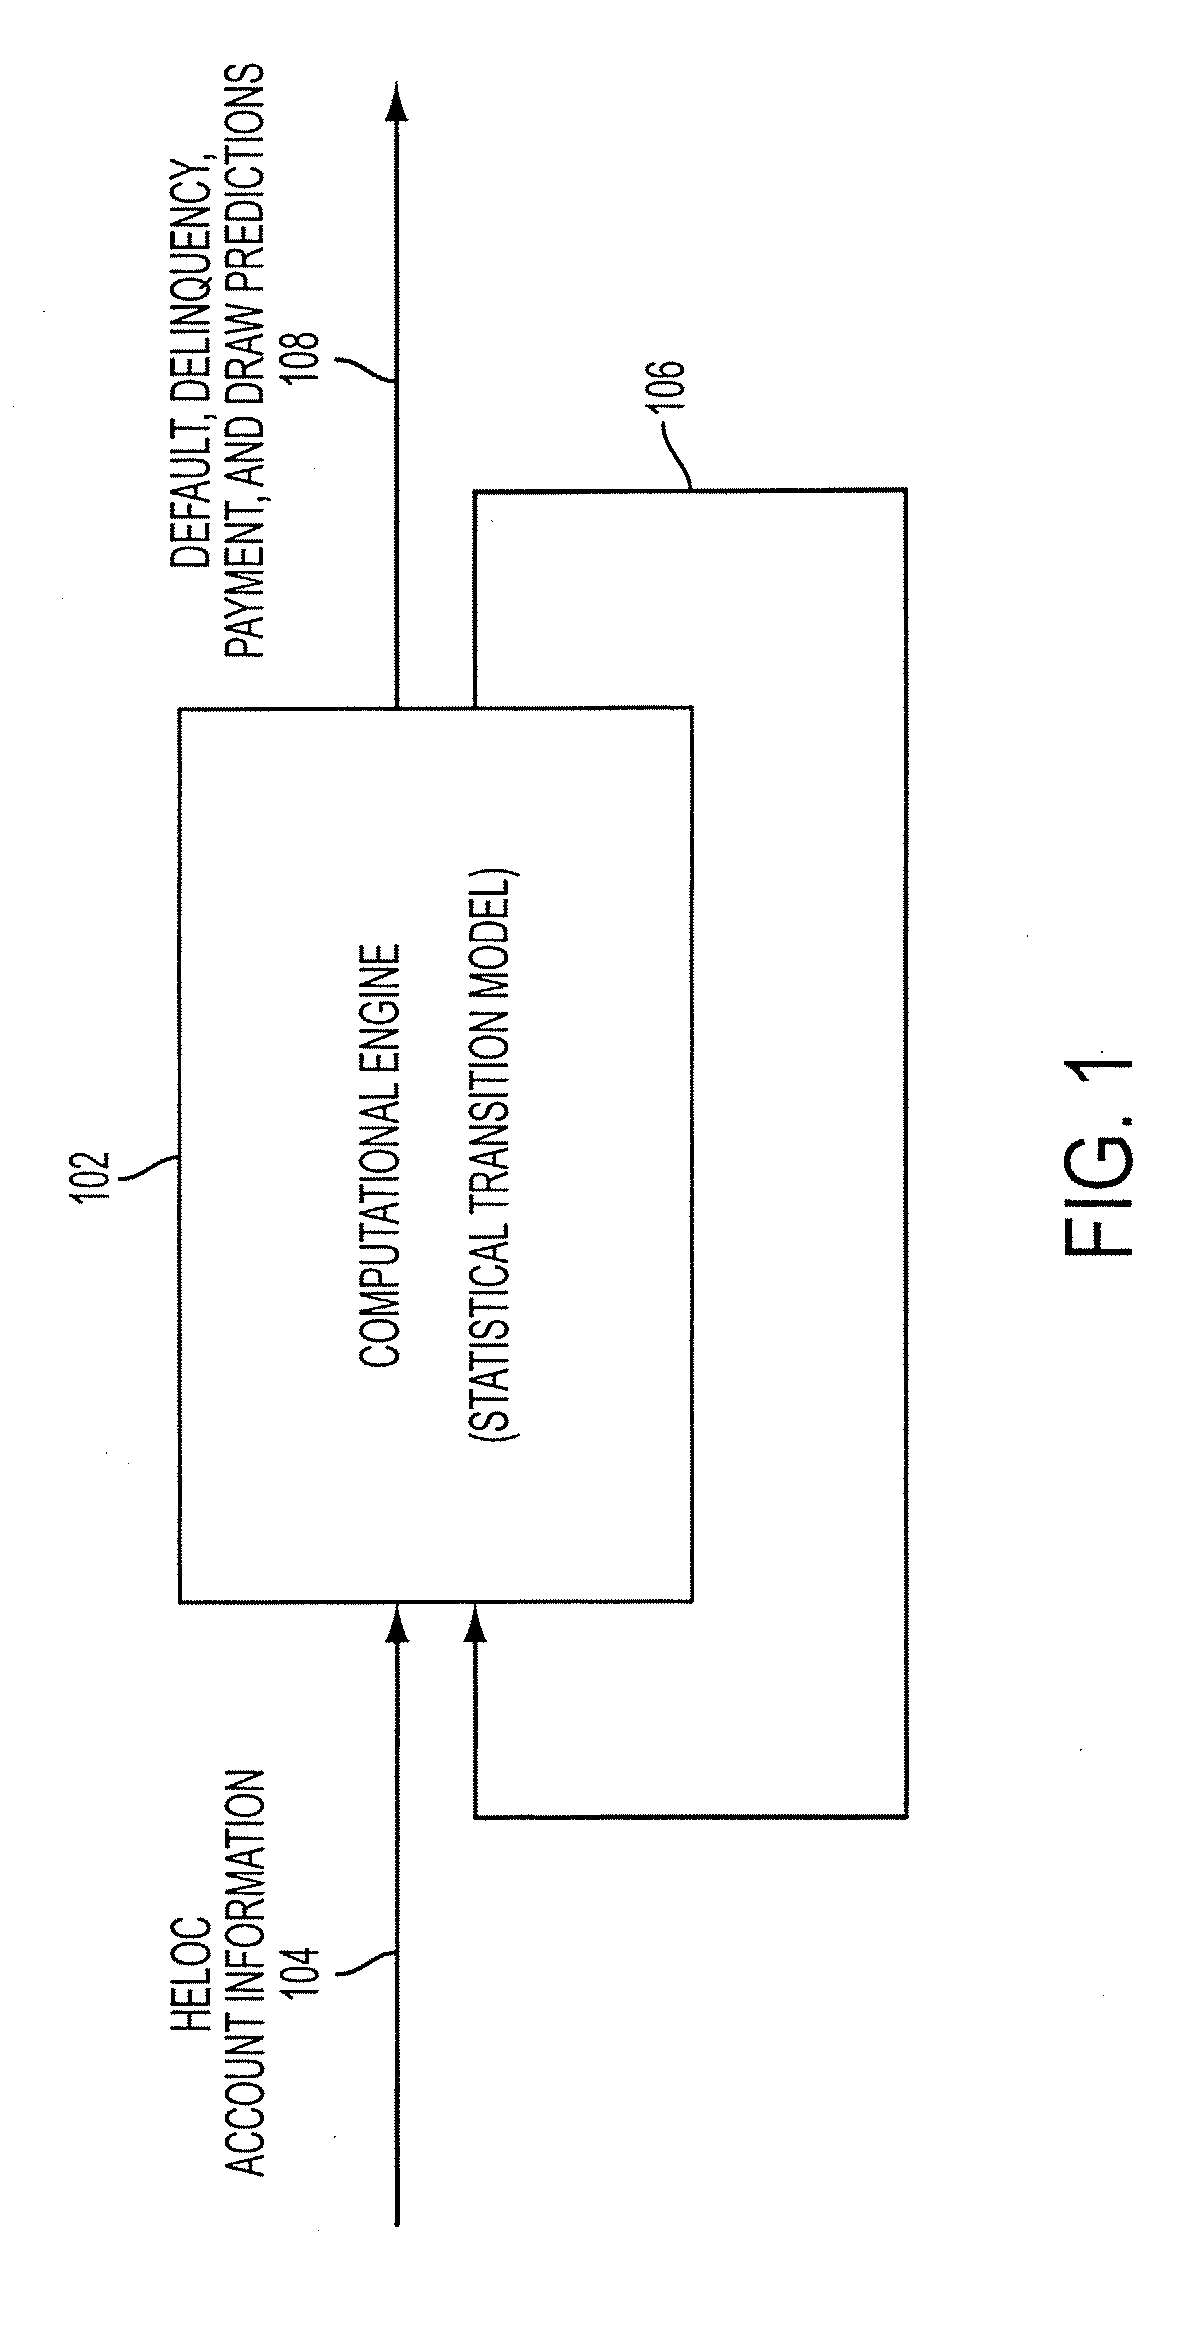 Method and apparatus for predicting outcomes of a home equity line of credit